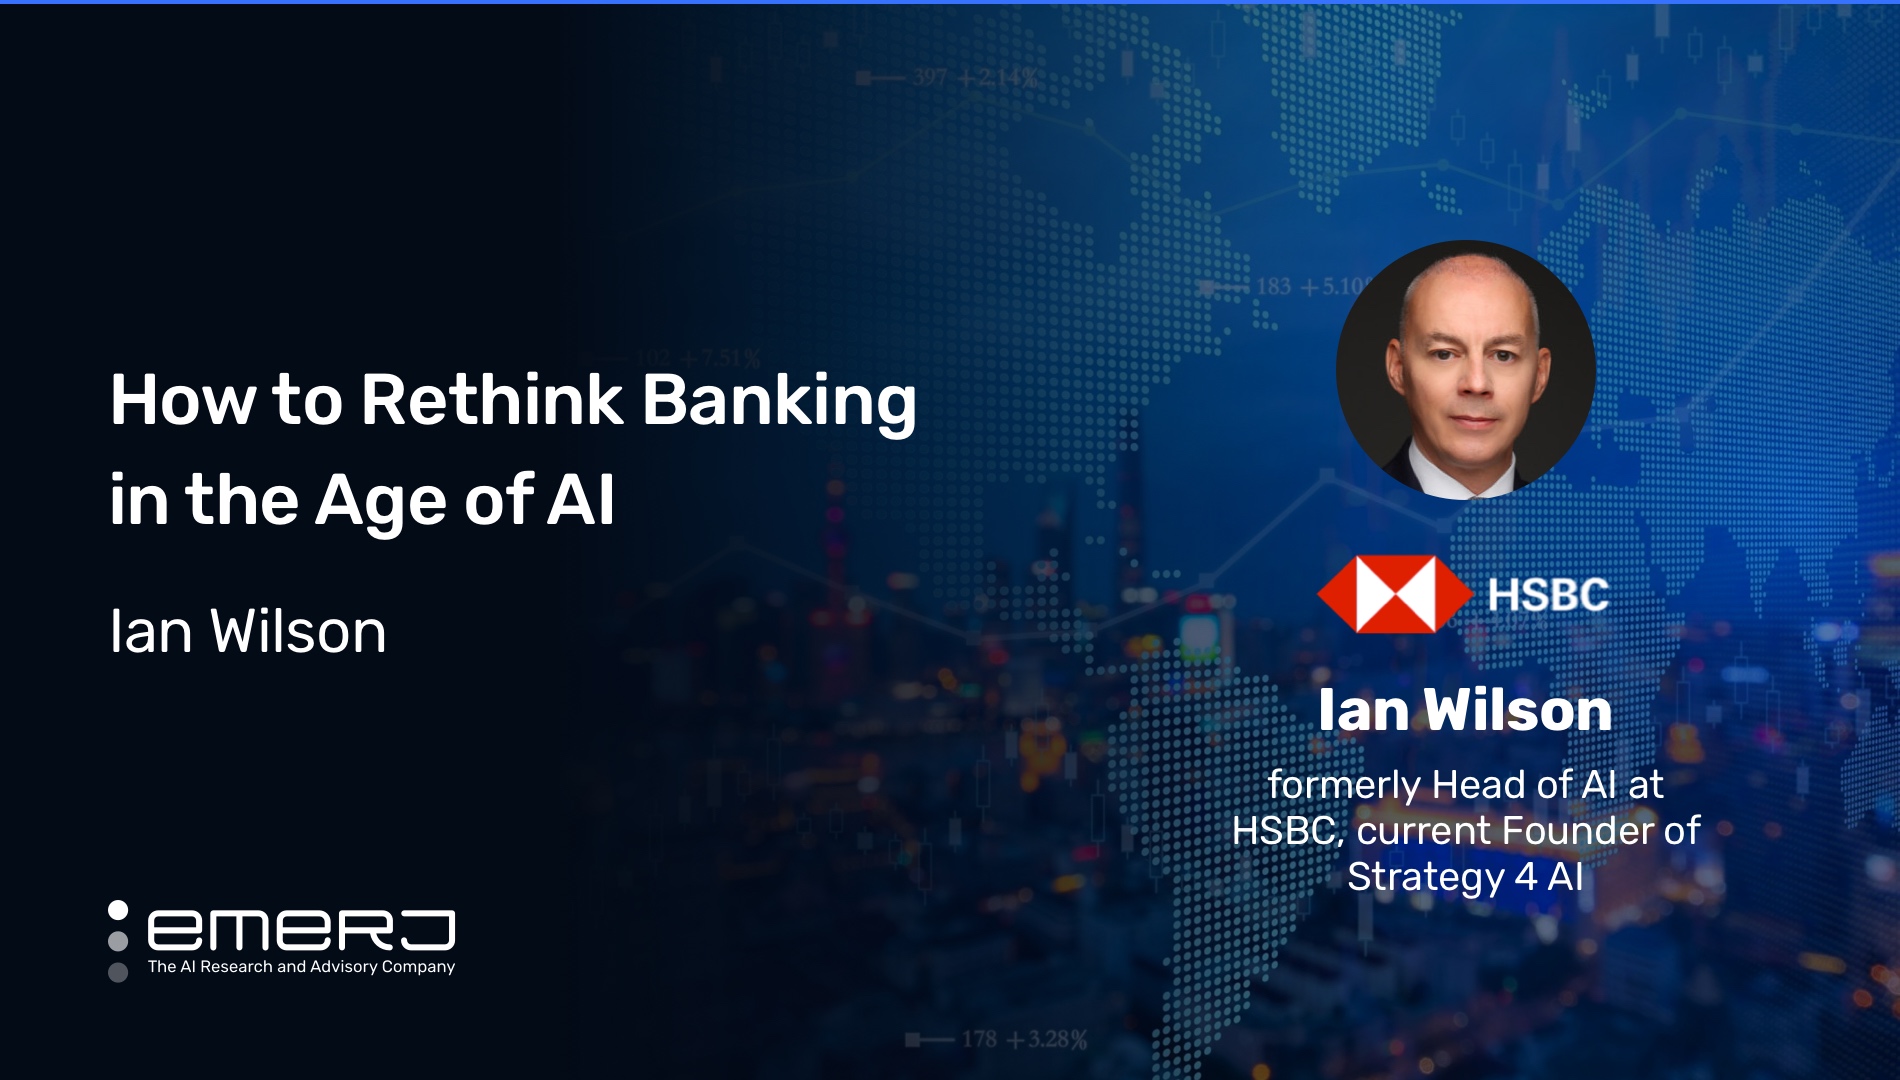 How to Rethink Banking in the Age of AI – with Ian Wilson, Former Head of AI at HSBC